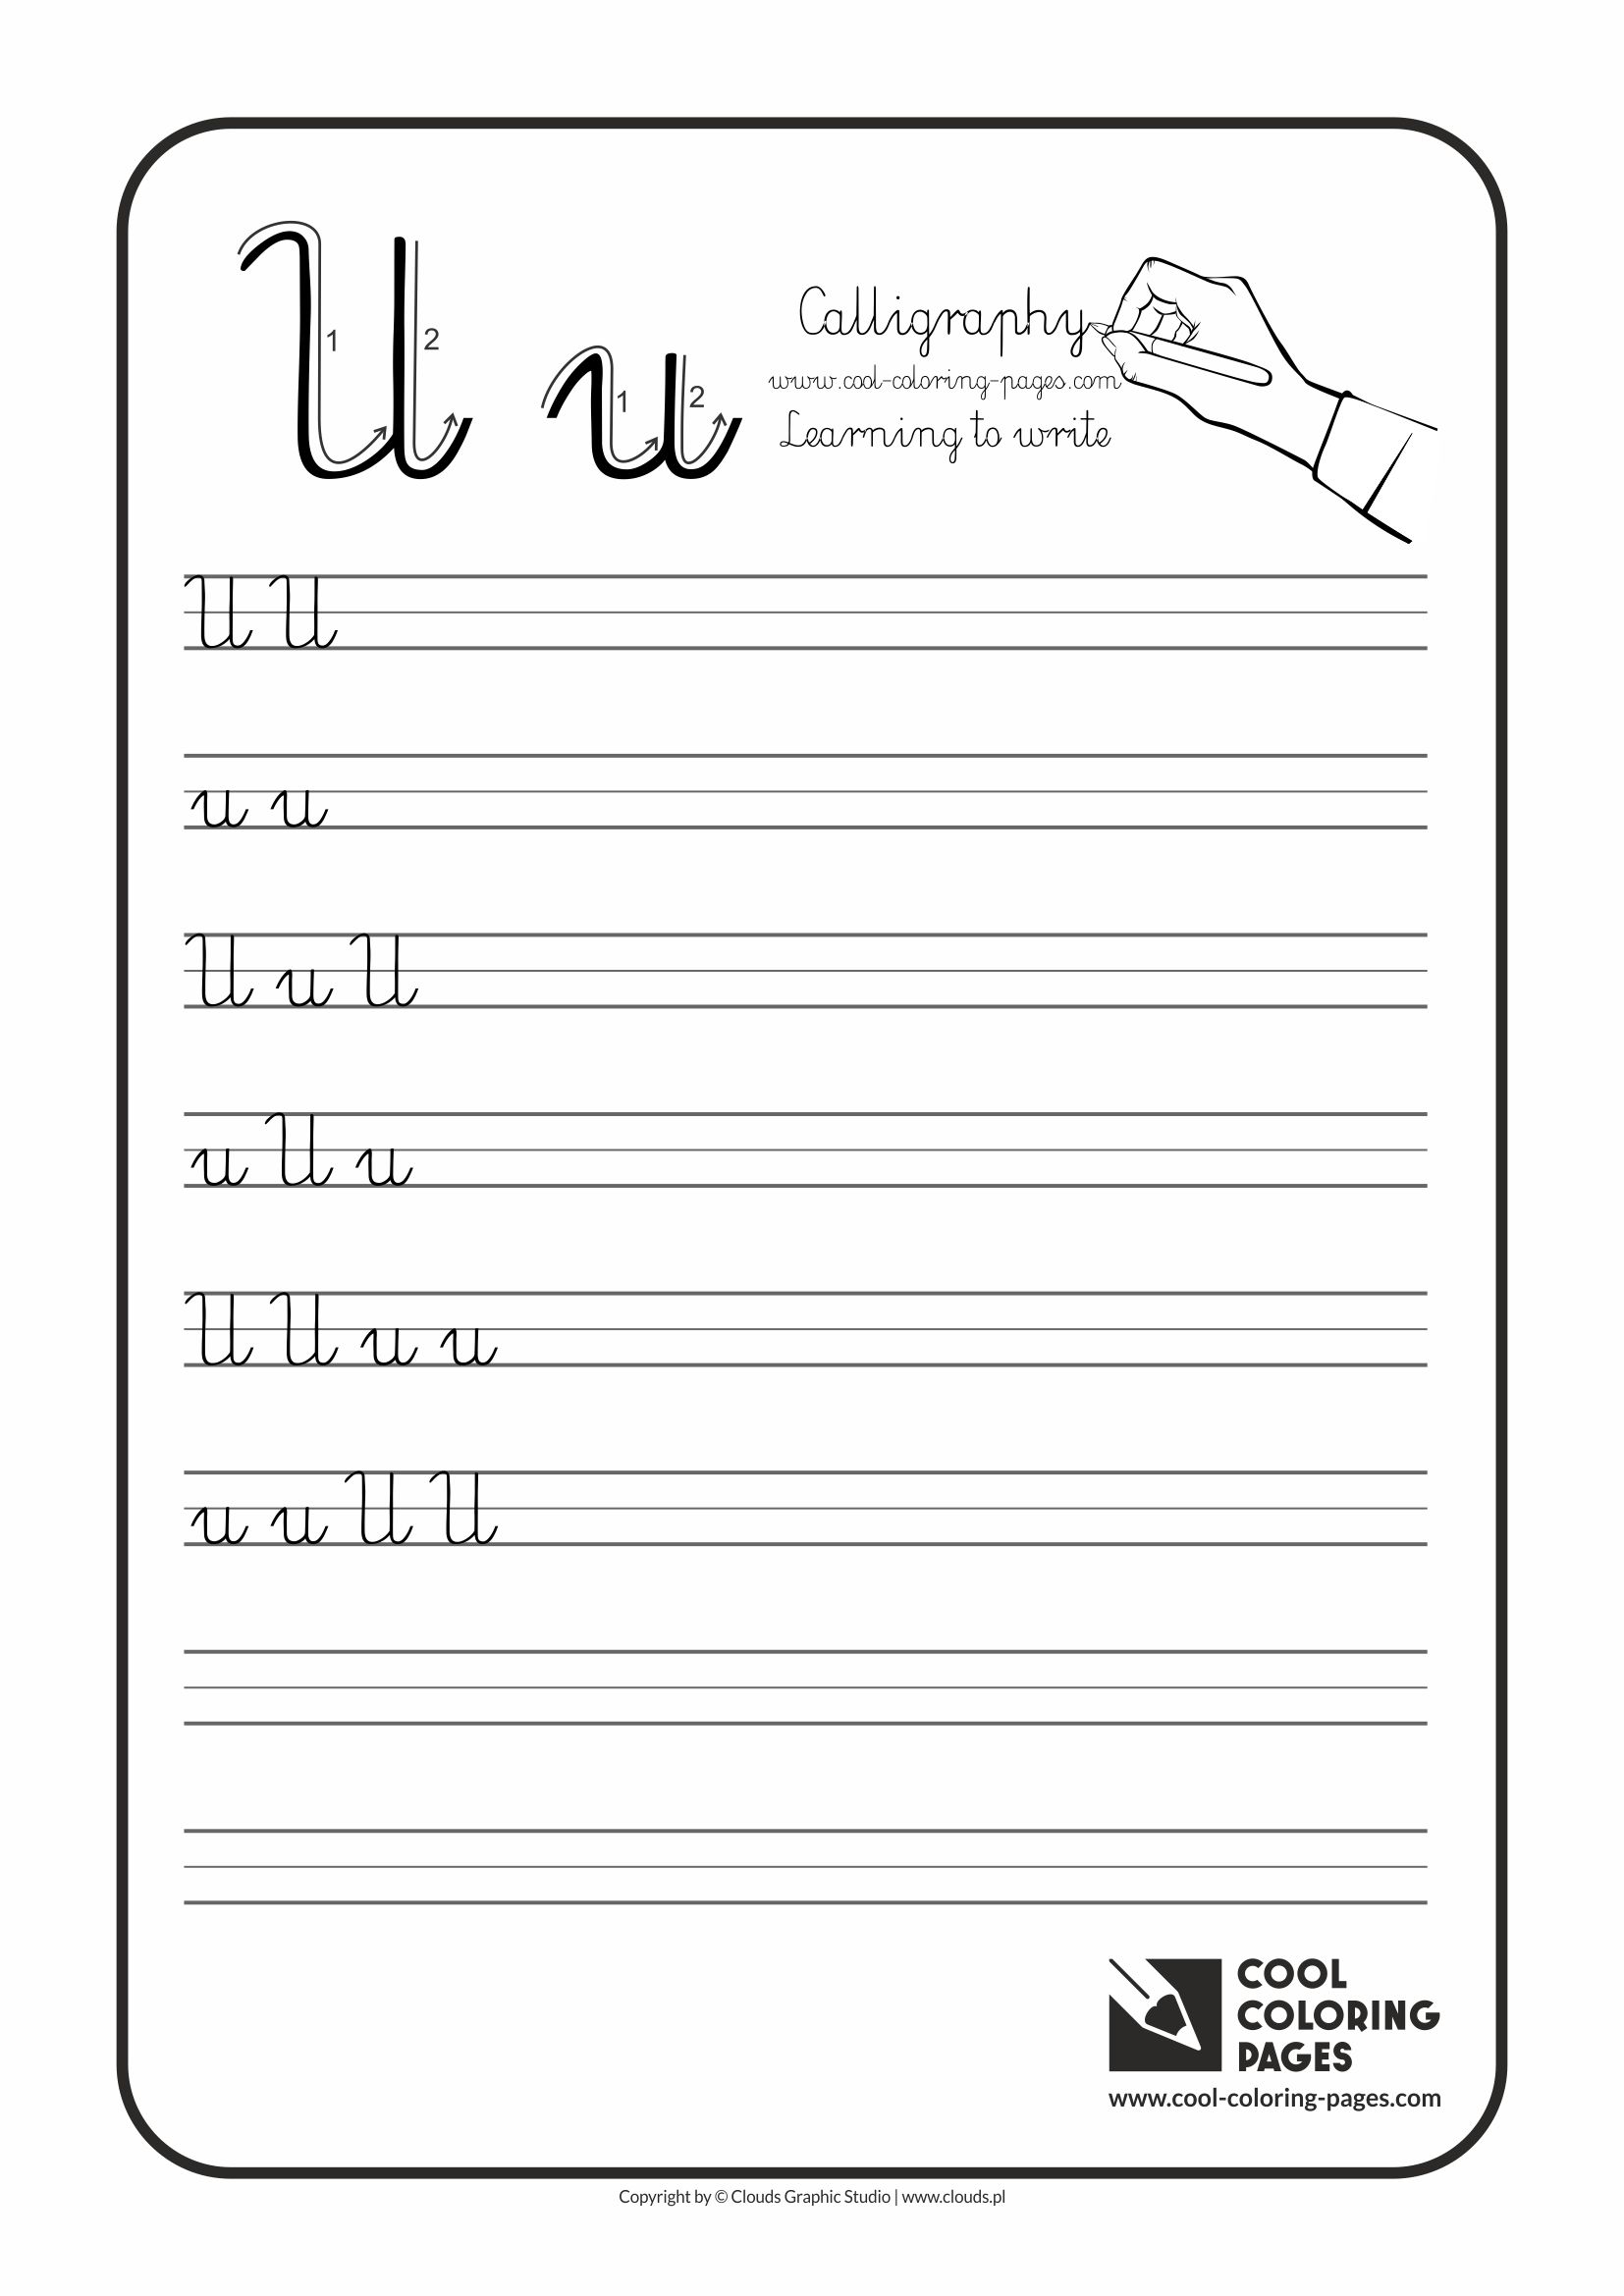 Cool Coloring Pages / Calligraphy / Letter U - Handwriting for kids / Worksheets